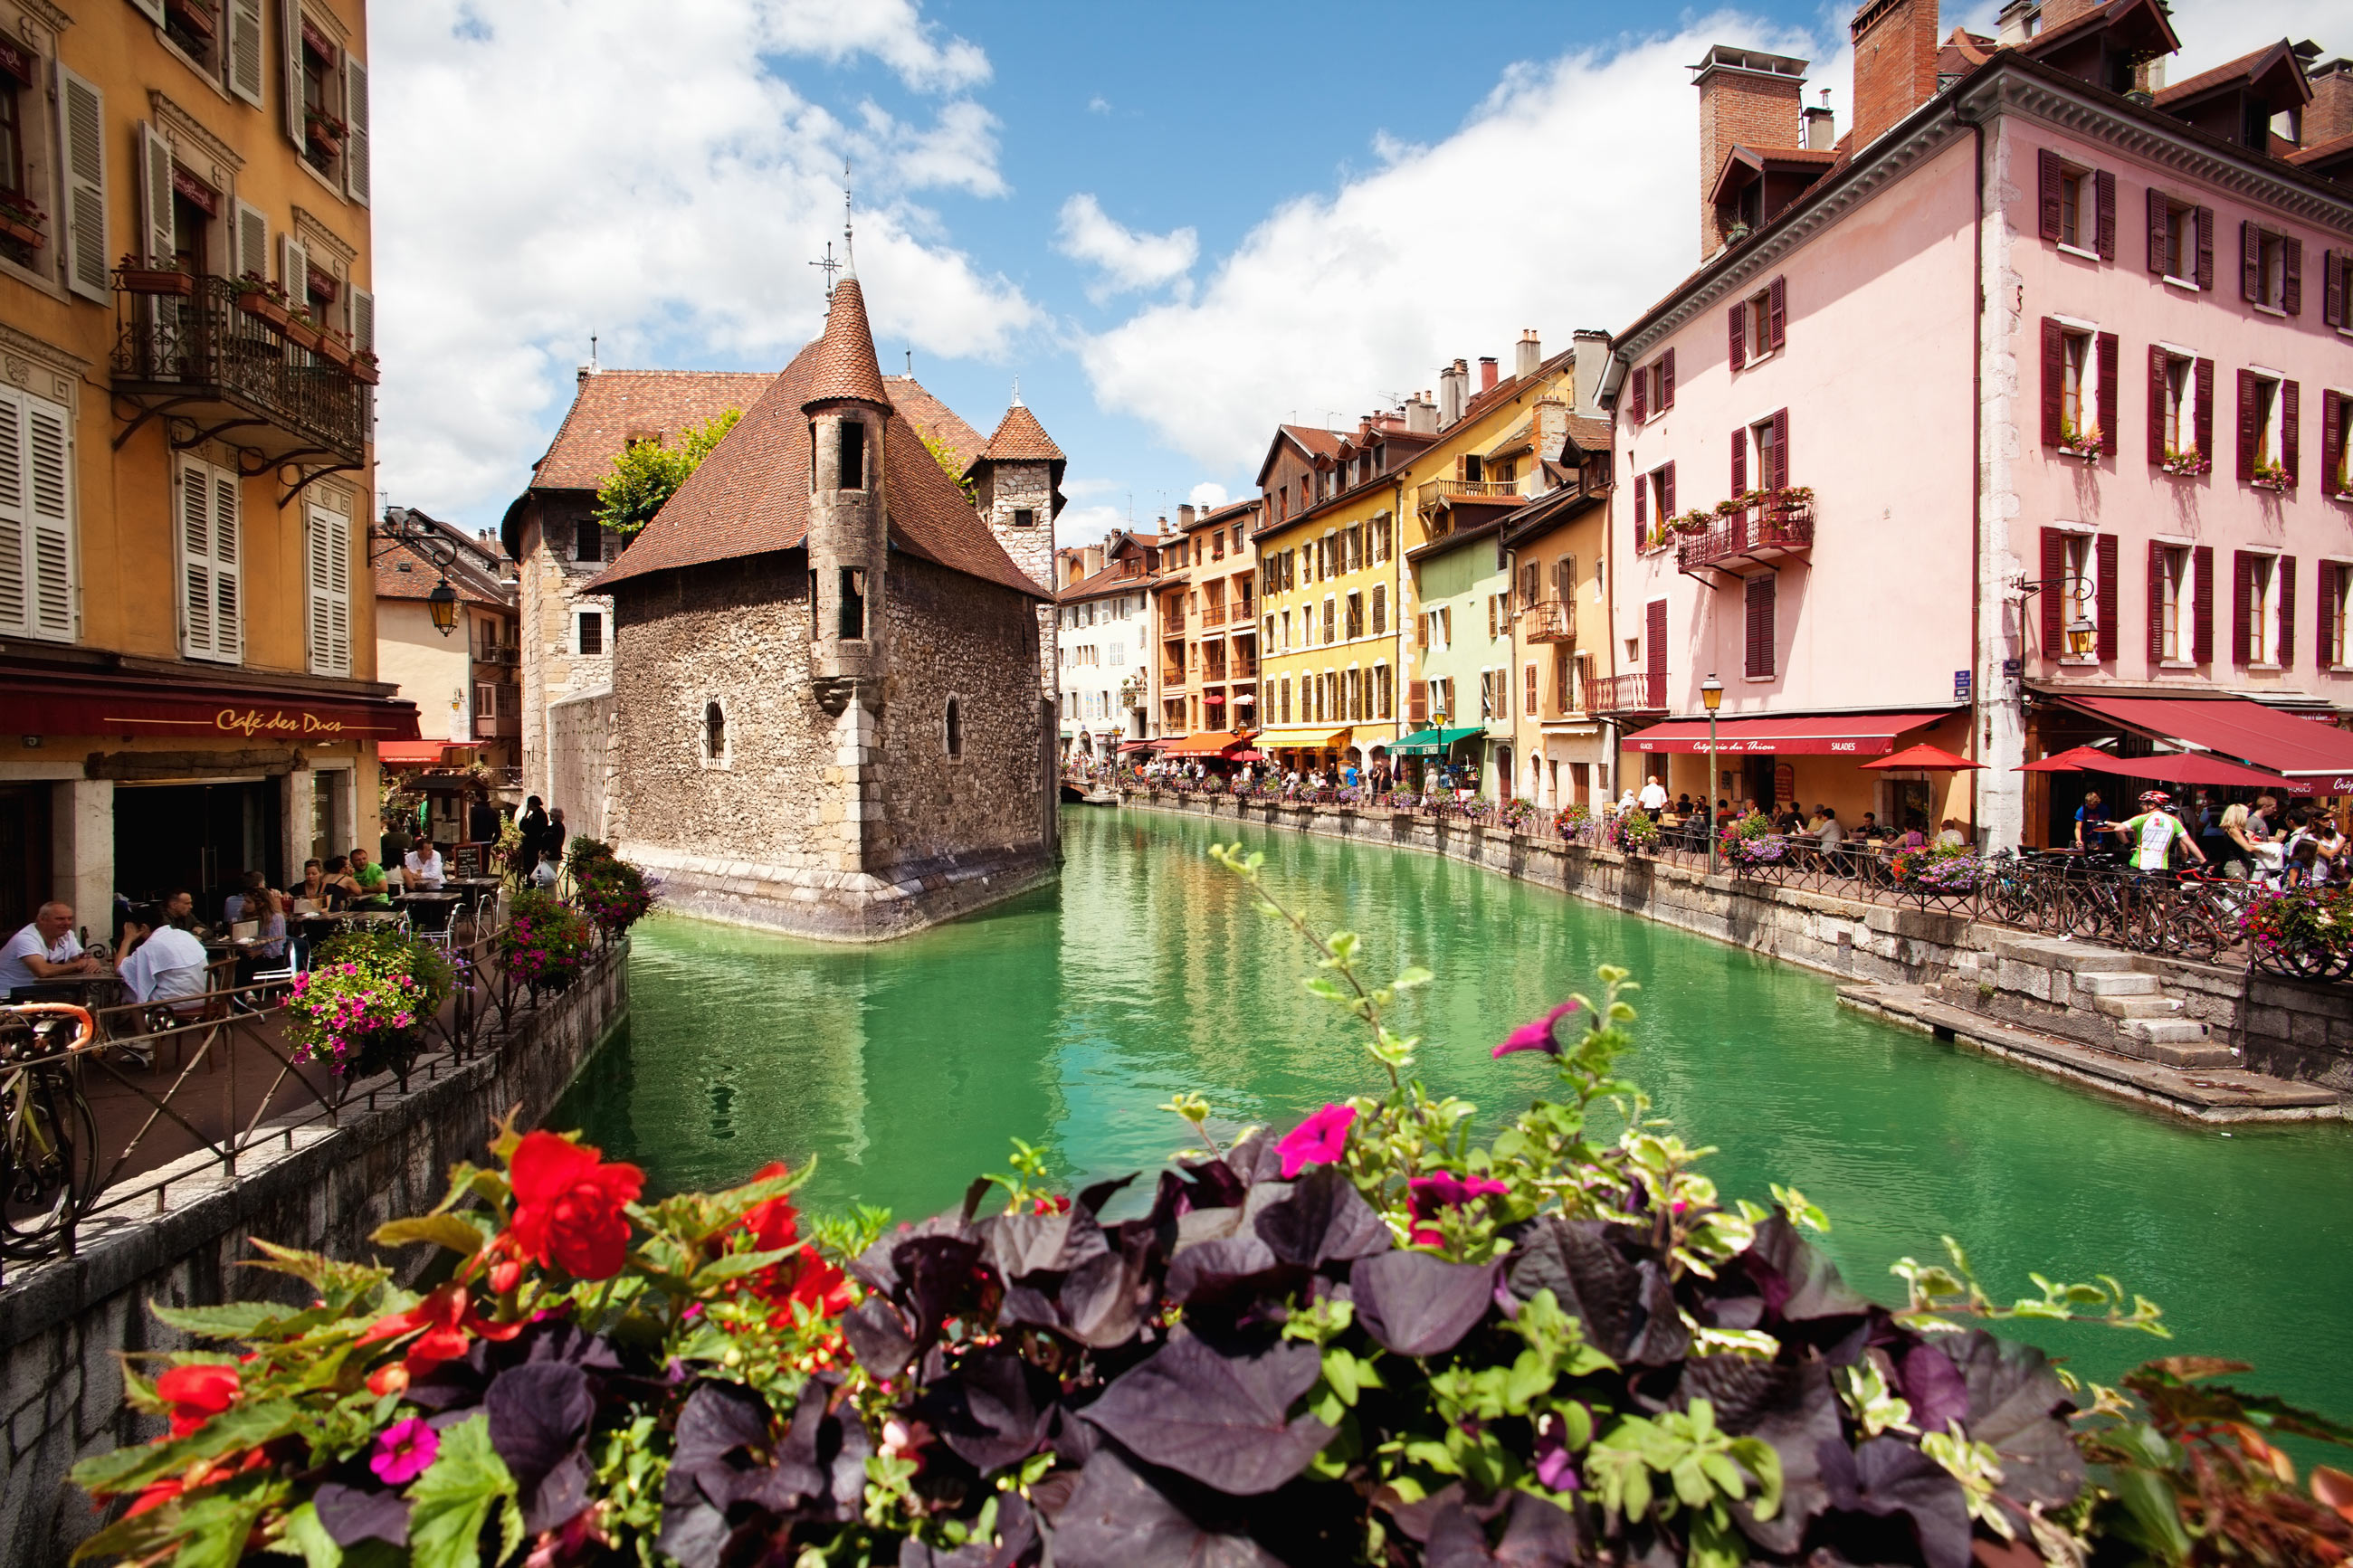 The old jail of Annecy  © Gayane/Shutterstock.com